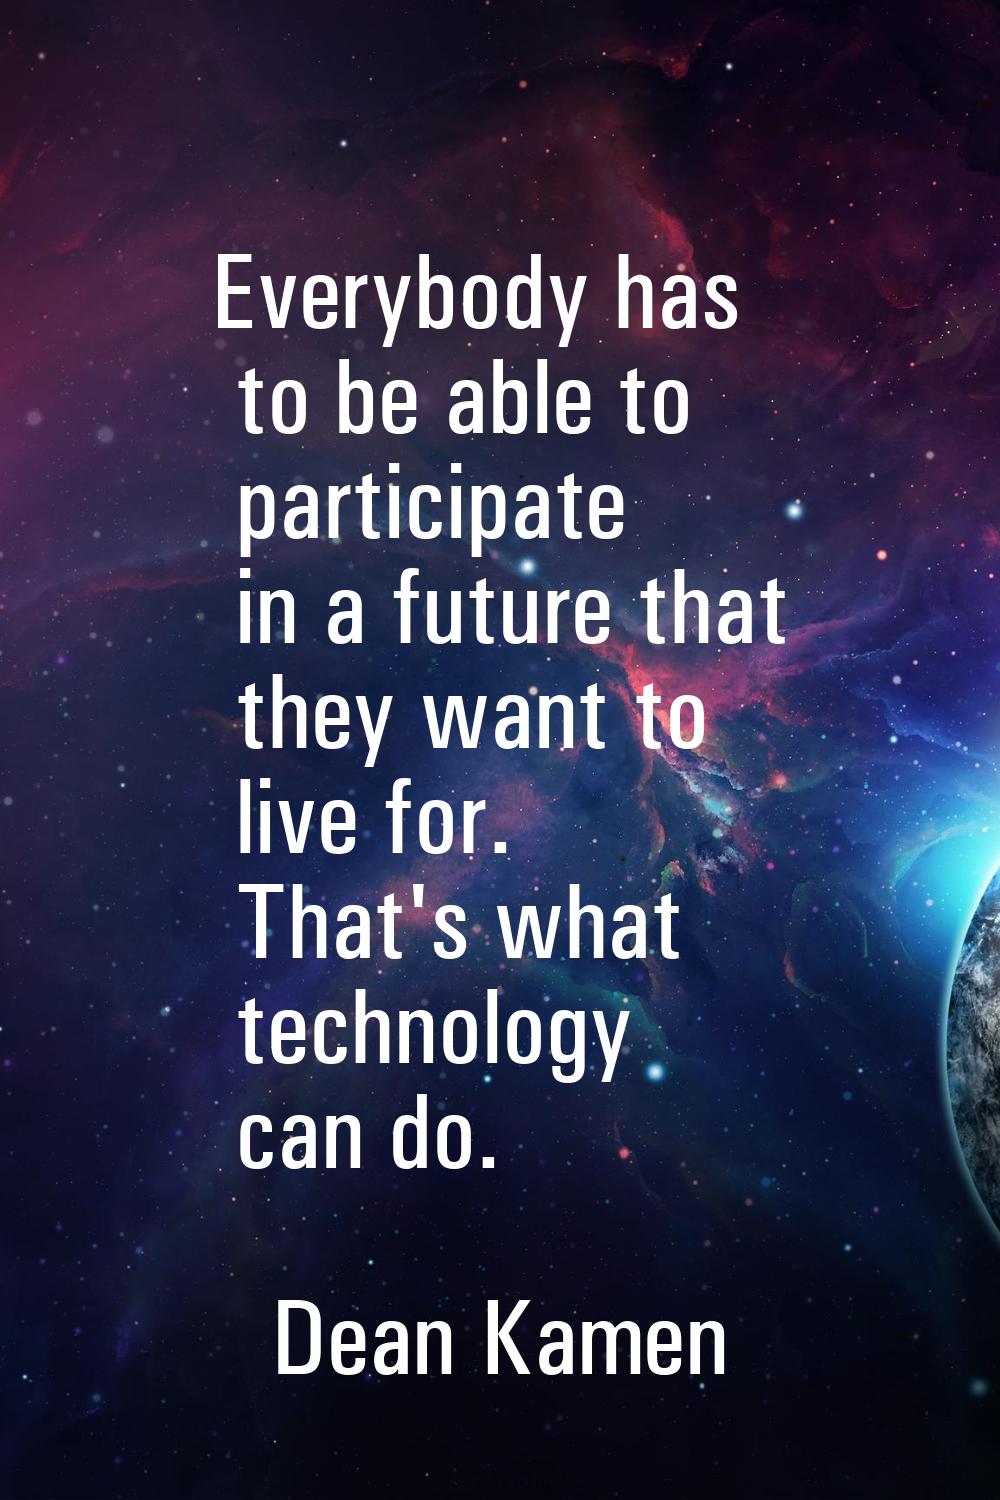 Everybody has to be able to participate in a future that they want to live for. That's what technol